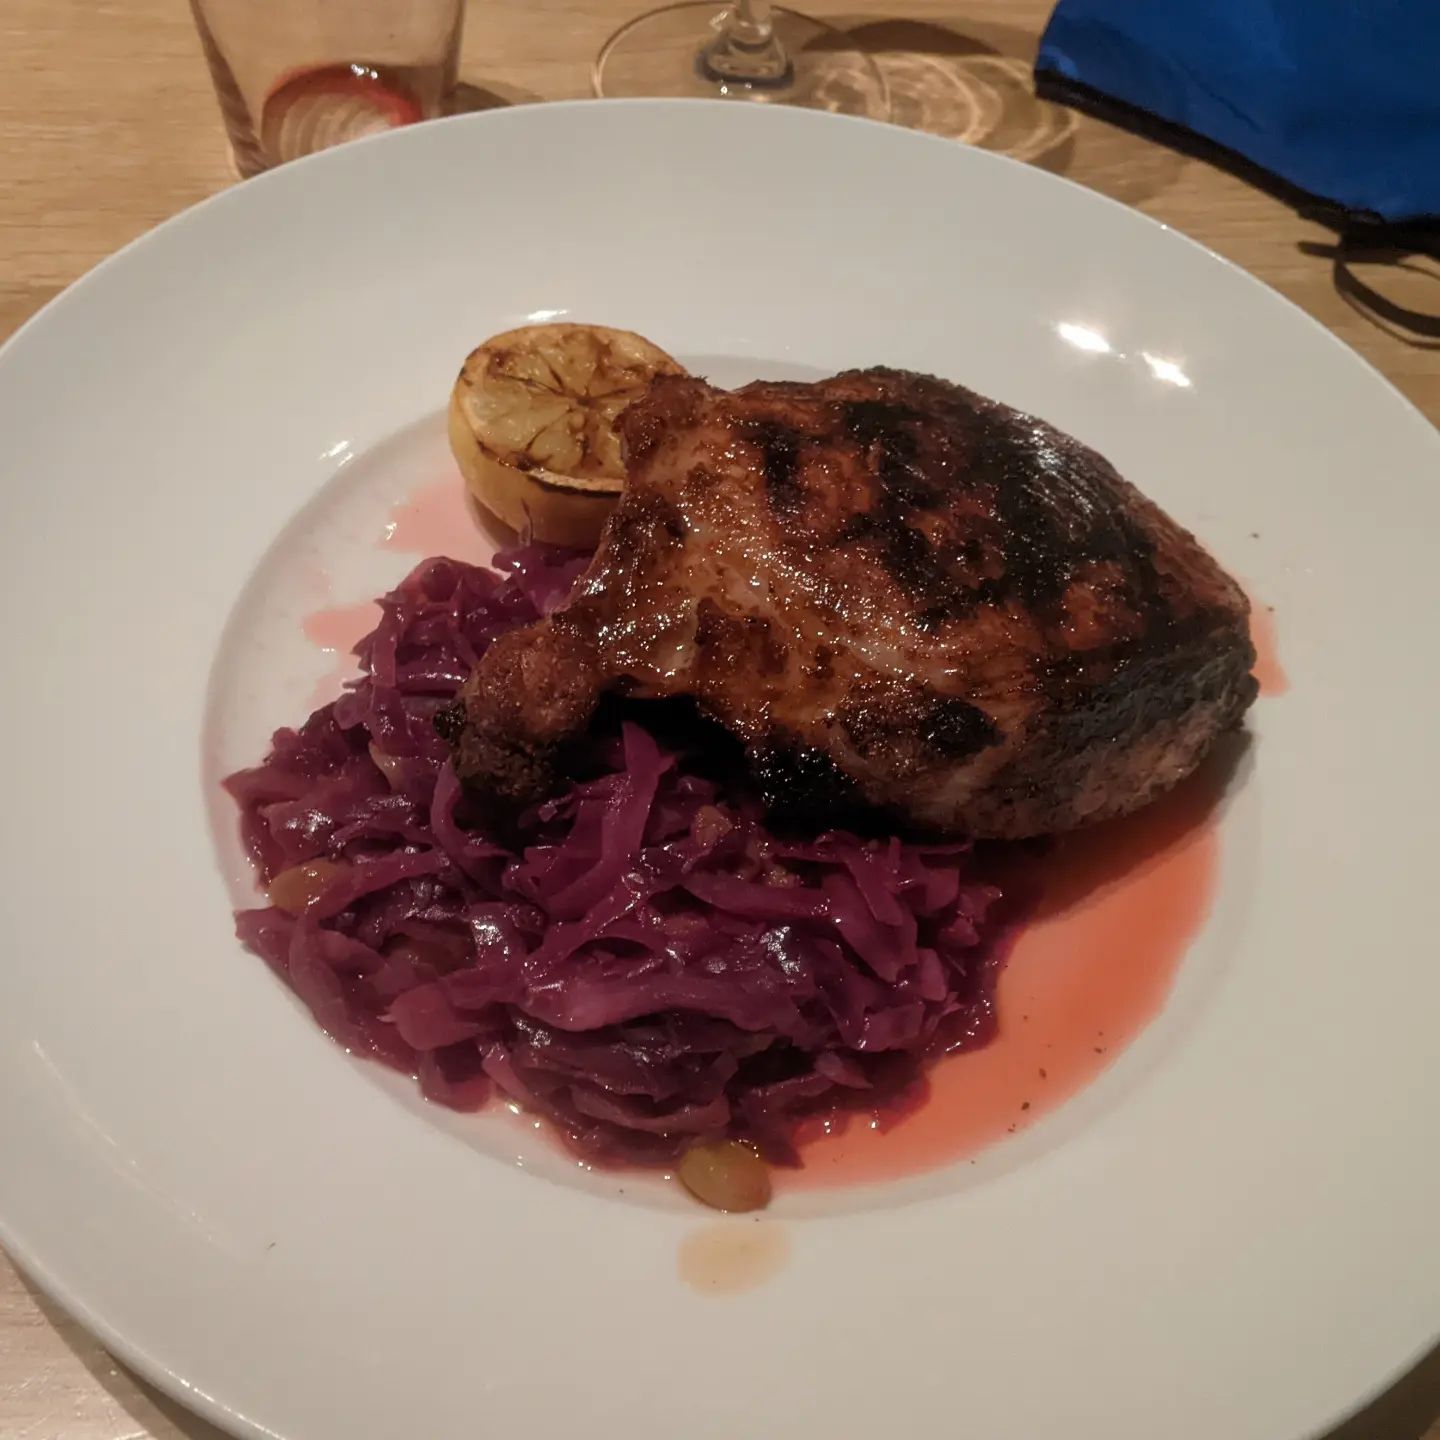 Yeah I know... #foodporn from the same place two nights in a row. But it was awesome! Pork chop and red cabbage. Quite tasty.It also didn't hurt that it is snowing quite a lot and this place is right around the corner from my hotel